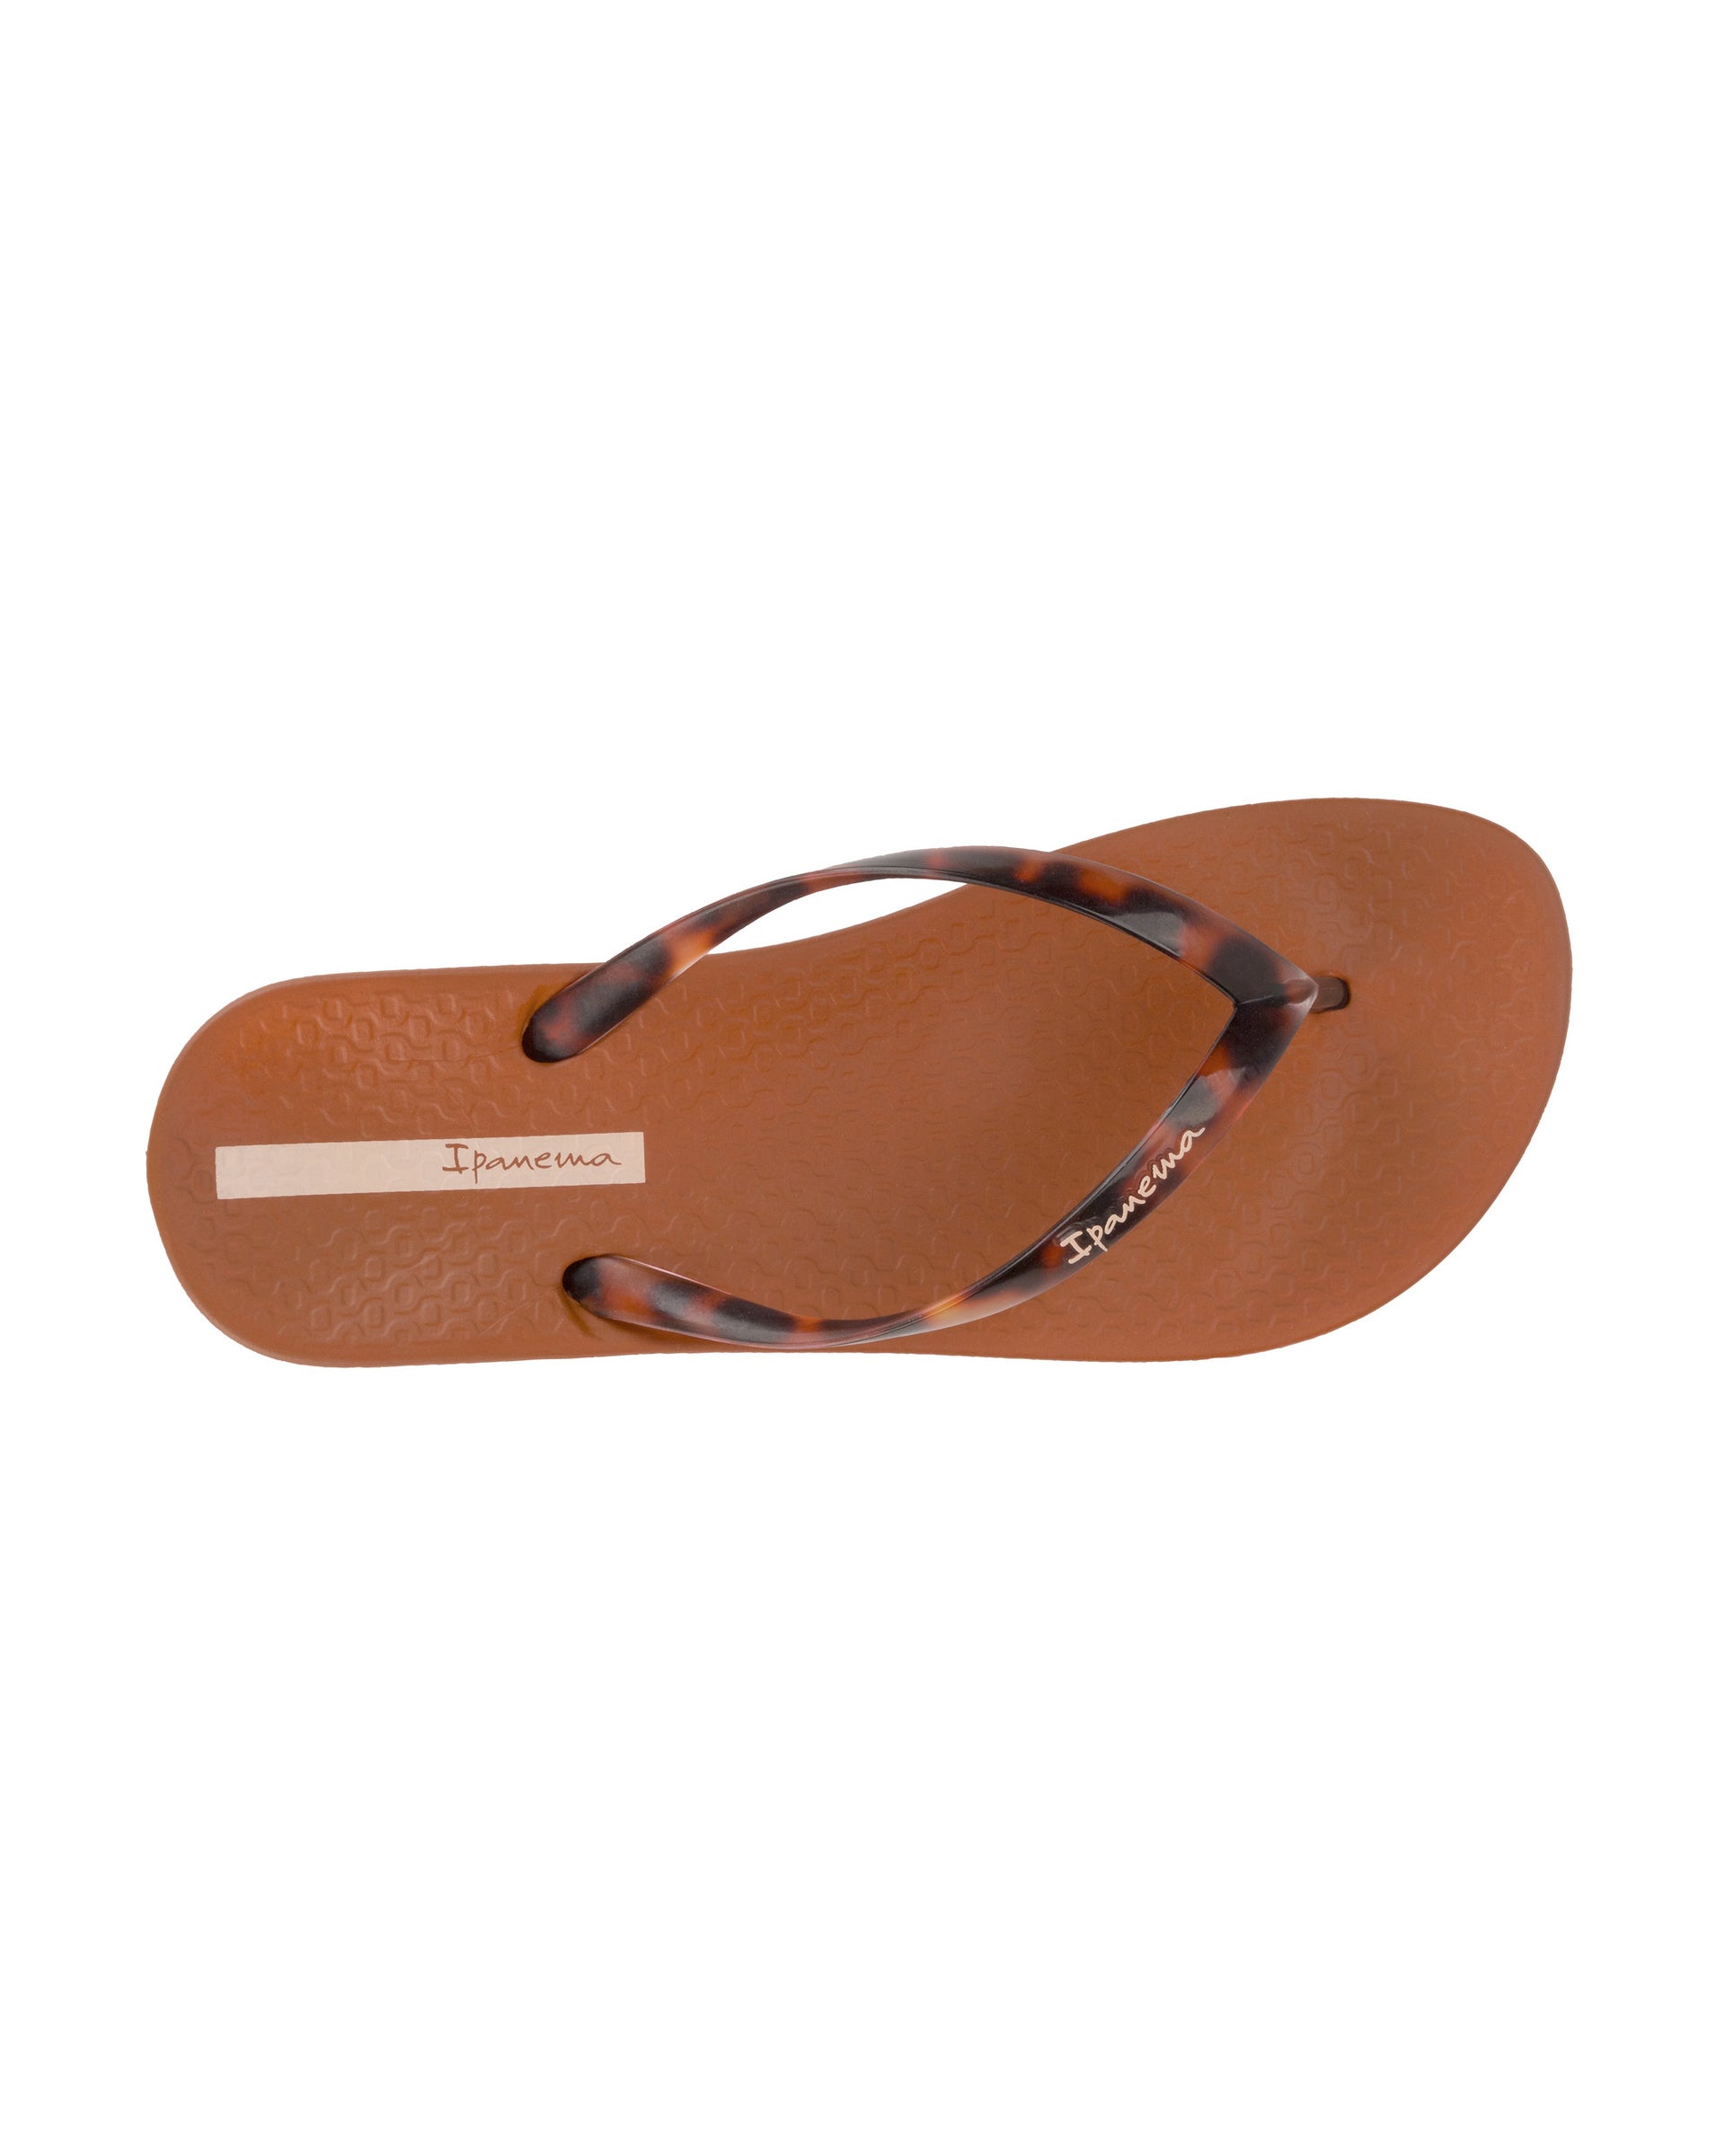 Top view of a brown Ipanema Ana Connect women's flip flop with brown tortoiseshell  color strap.